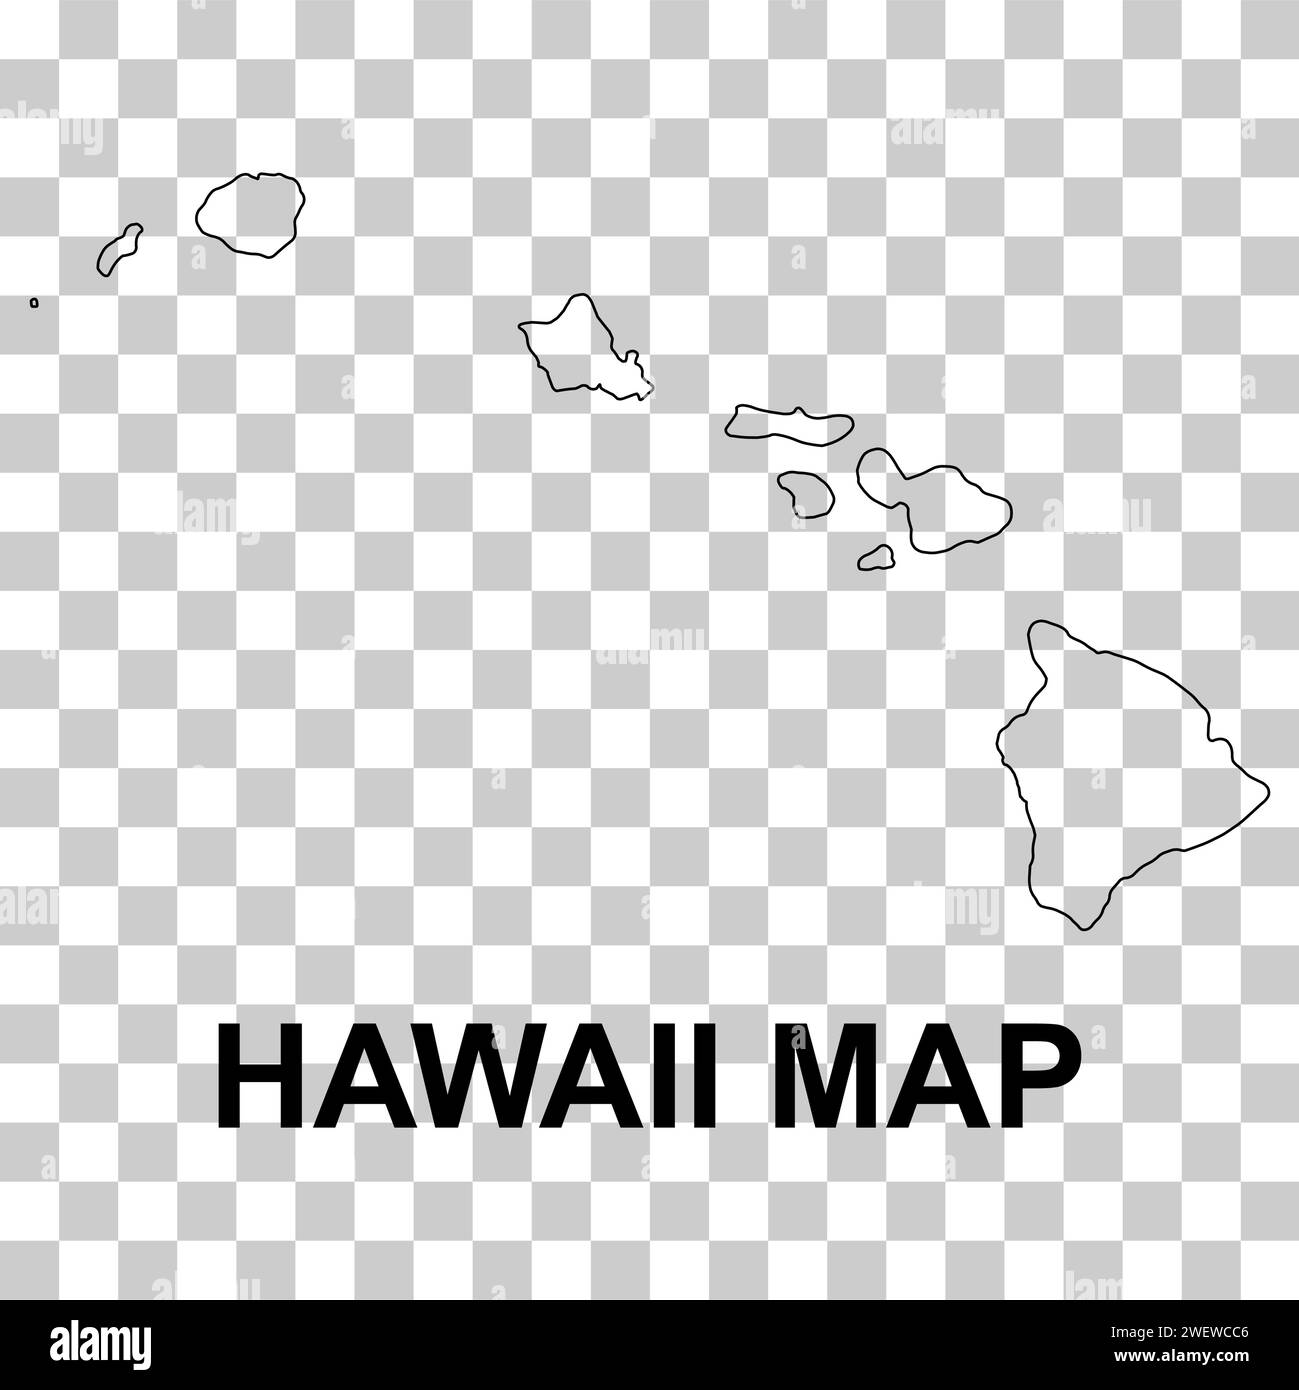 Hawaii map shape, united states of america. Flat concept icon symbol vector illustration . Stock Vector